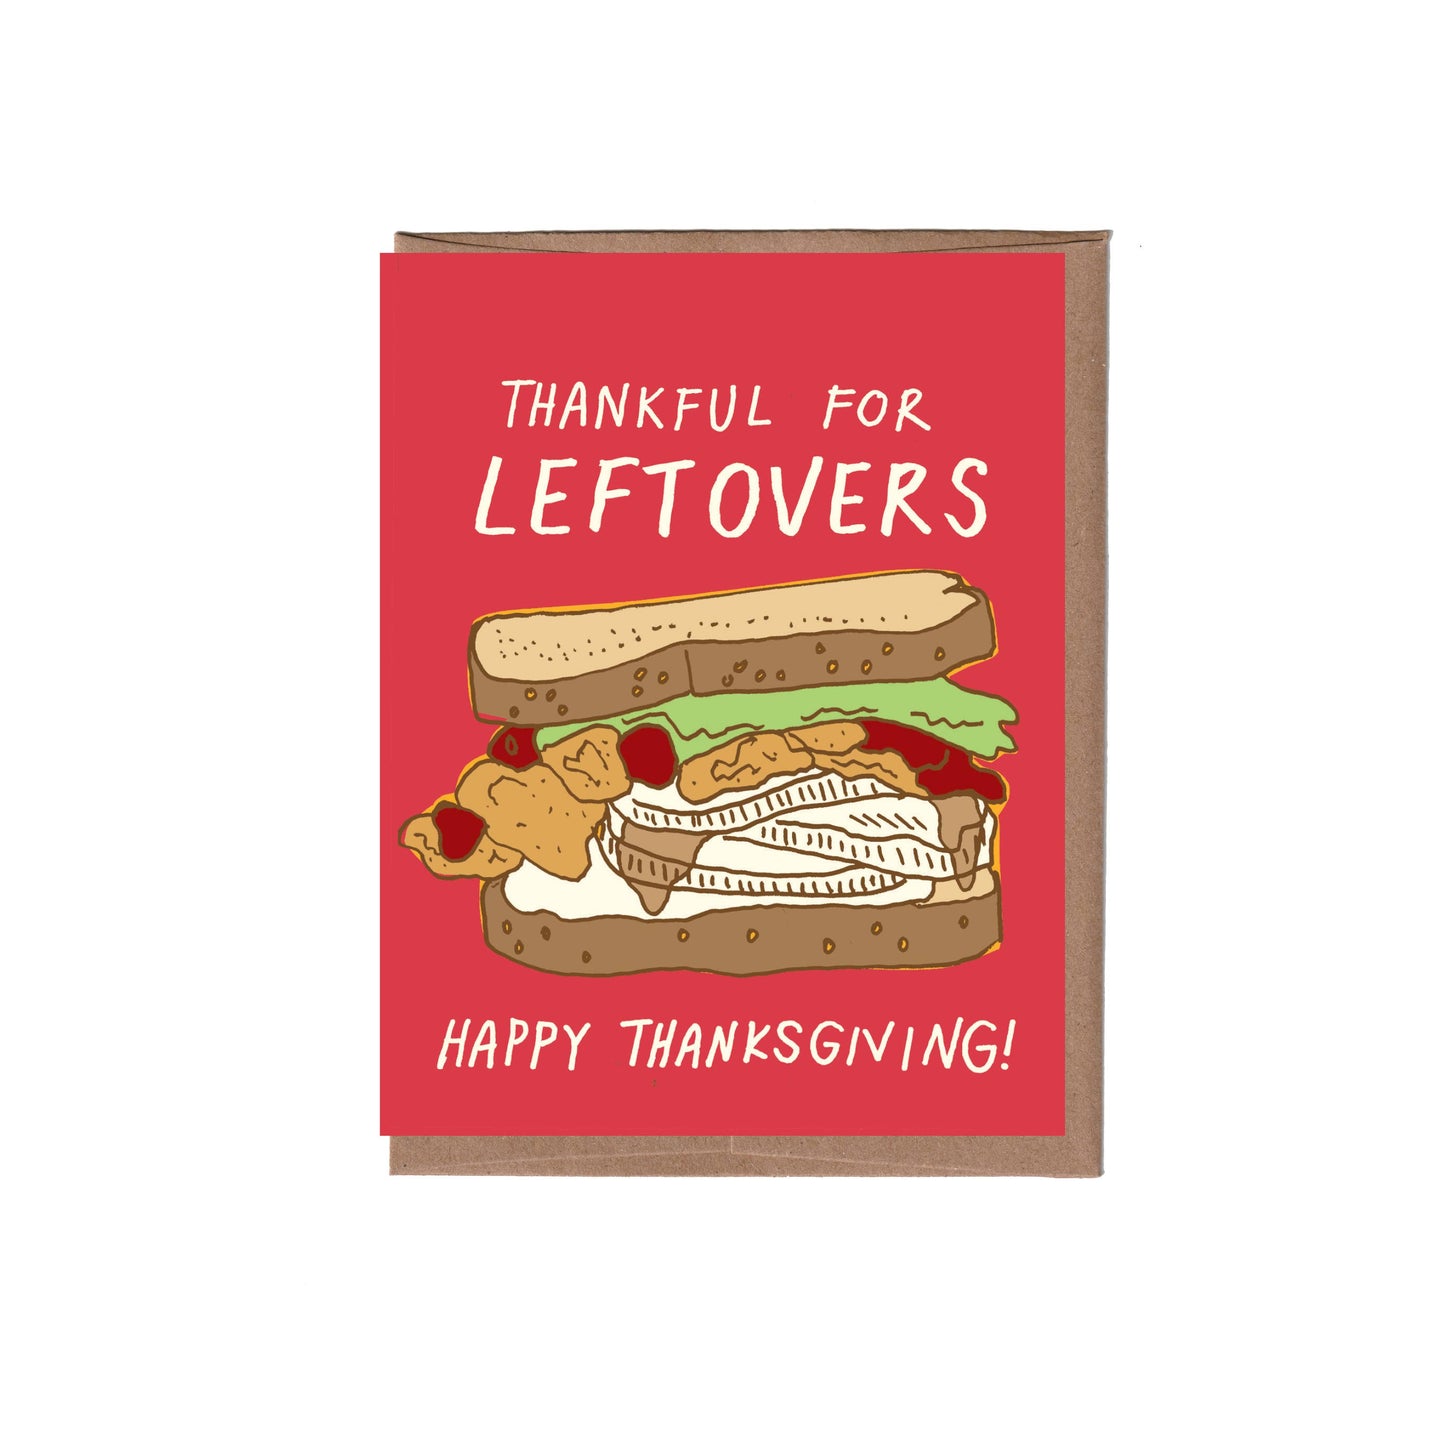 Greeting card with text "Thankful for leftovers...Happy Thanksgiving!" and illustration of a large over-stuffed sandwich made from Thanksgiving leftovers on a bright pink background. 